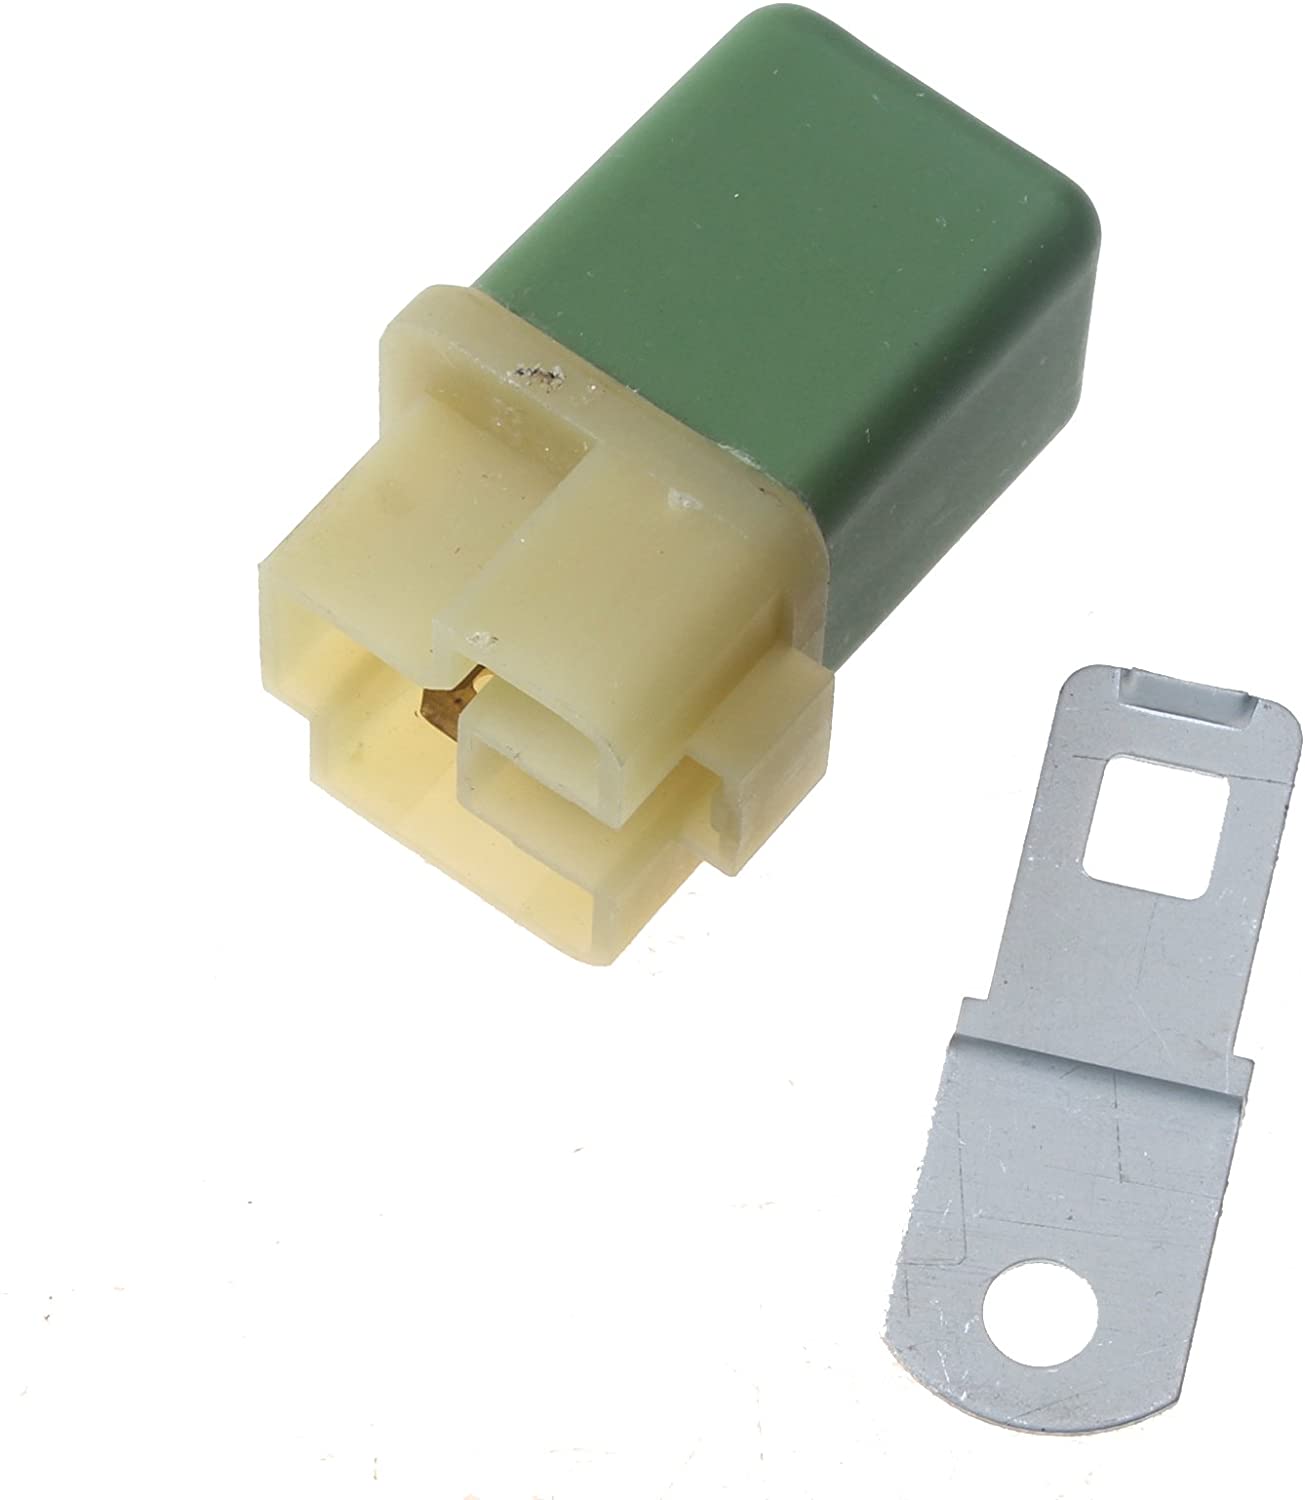 Relay AT154924 4251588 for John Deere Excavator 110 120 160LC 190 230LC 230LCR 270LC 330LCR 450LC 490E 550LC 690ELC 790ELC 80 892 992ELC - KUDUPARTS